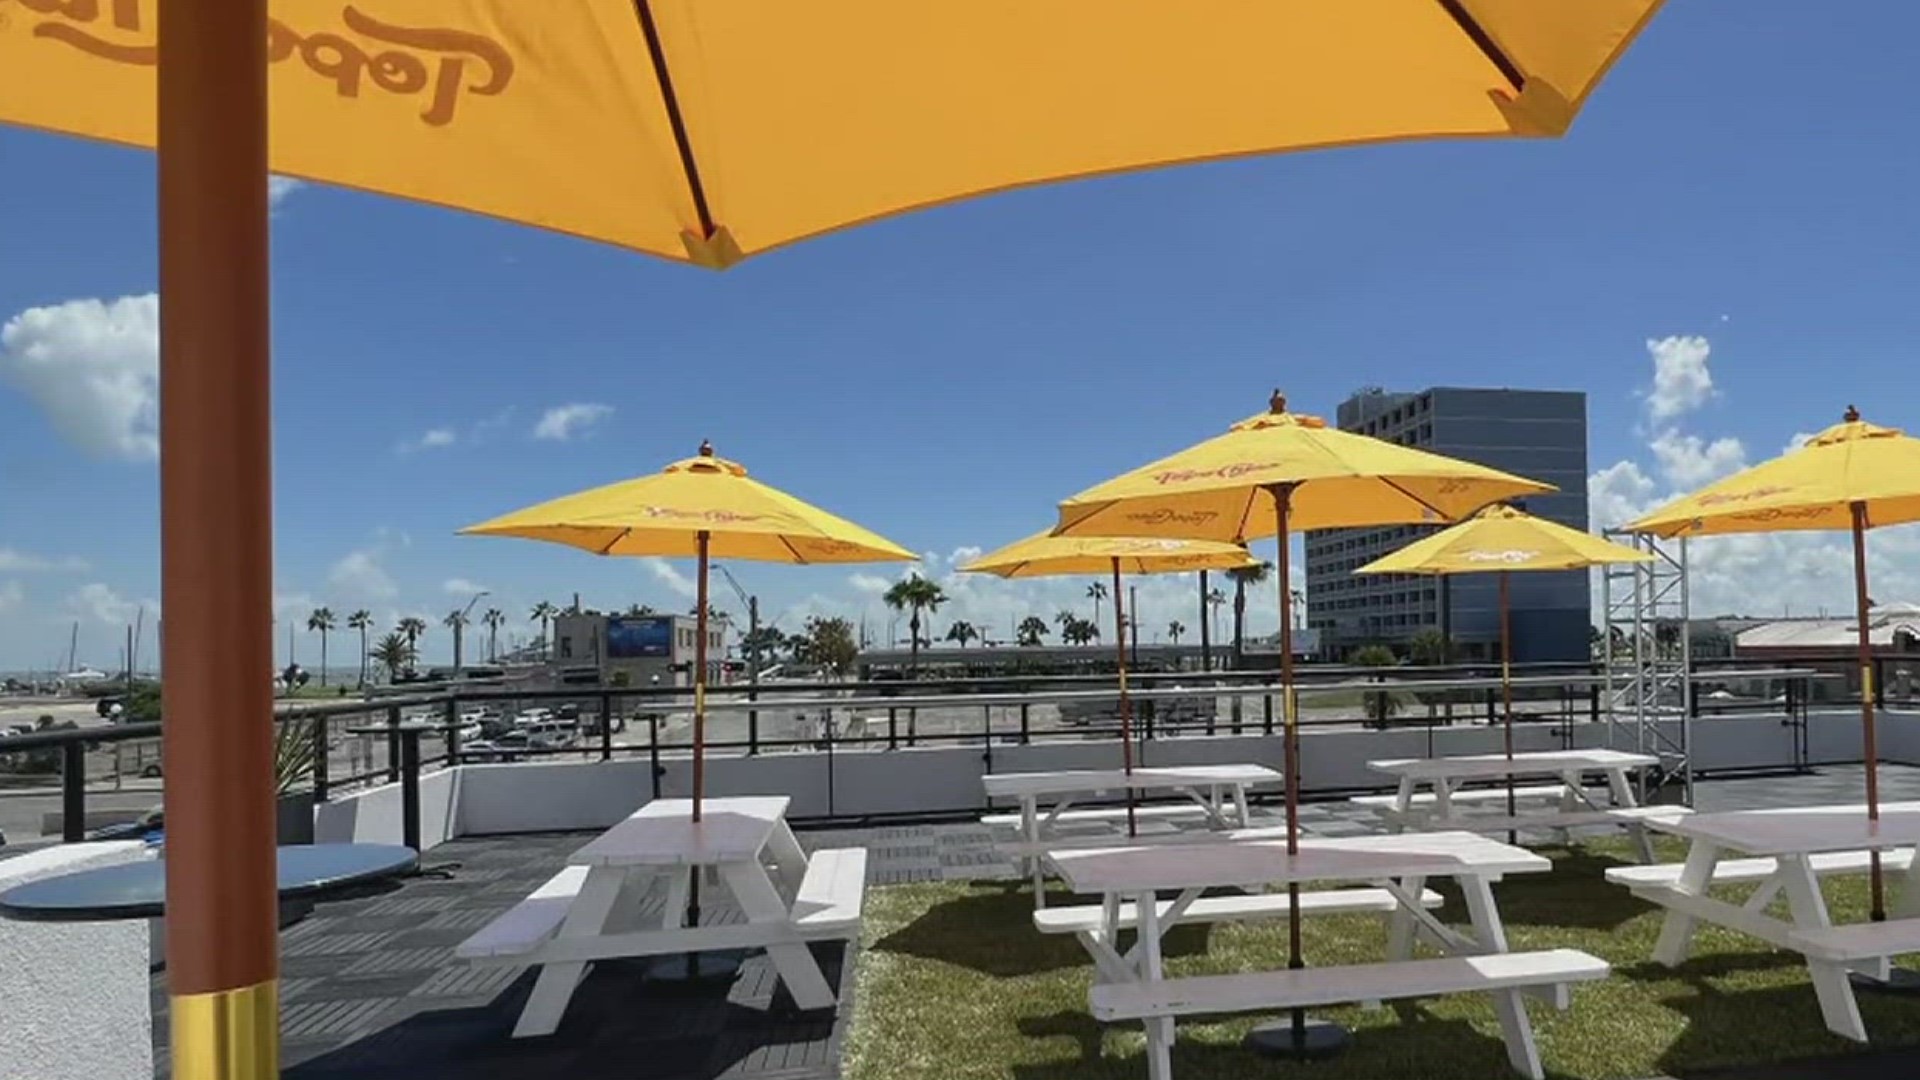 According to the Corpus Christi Downtown Management District, rooftop patios are the standard when it comes to urban spaces across the country.